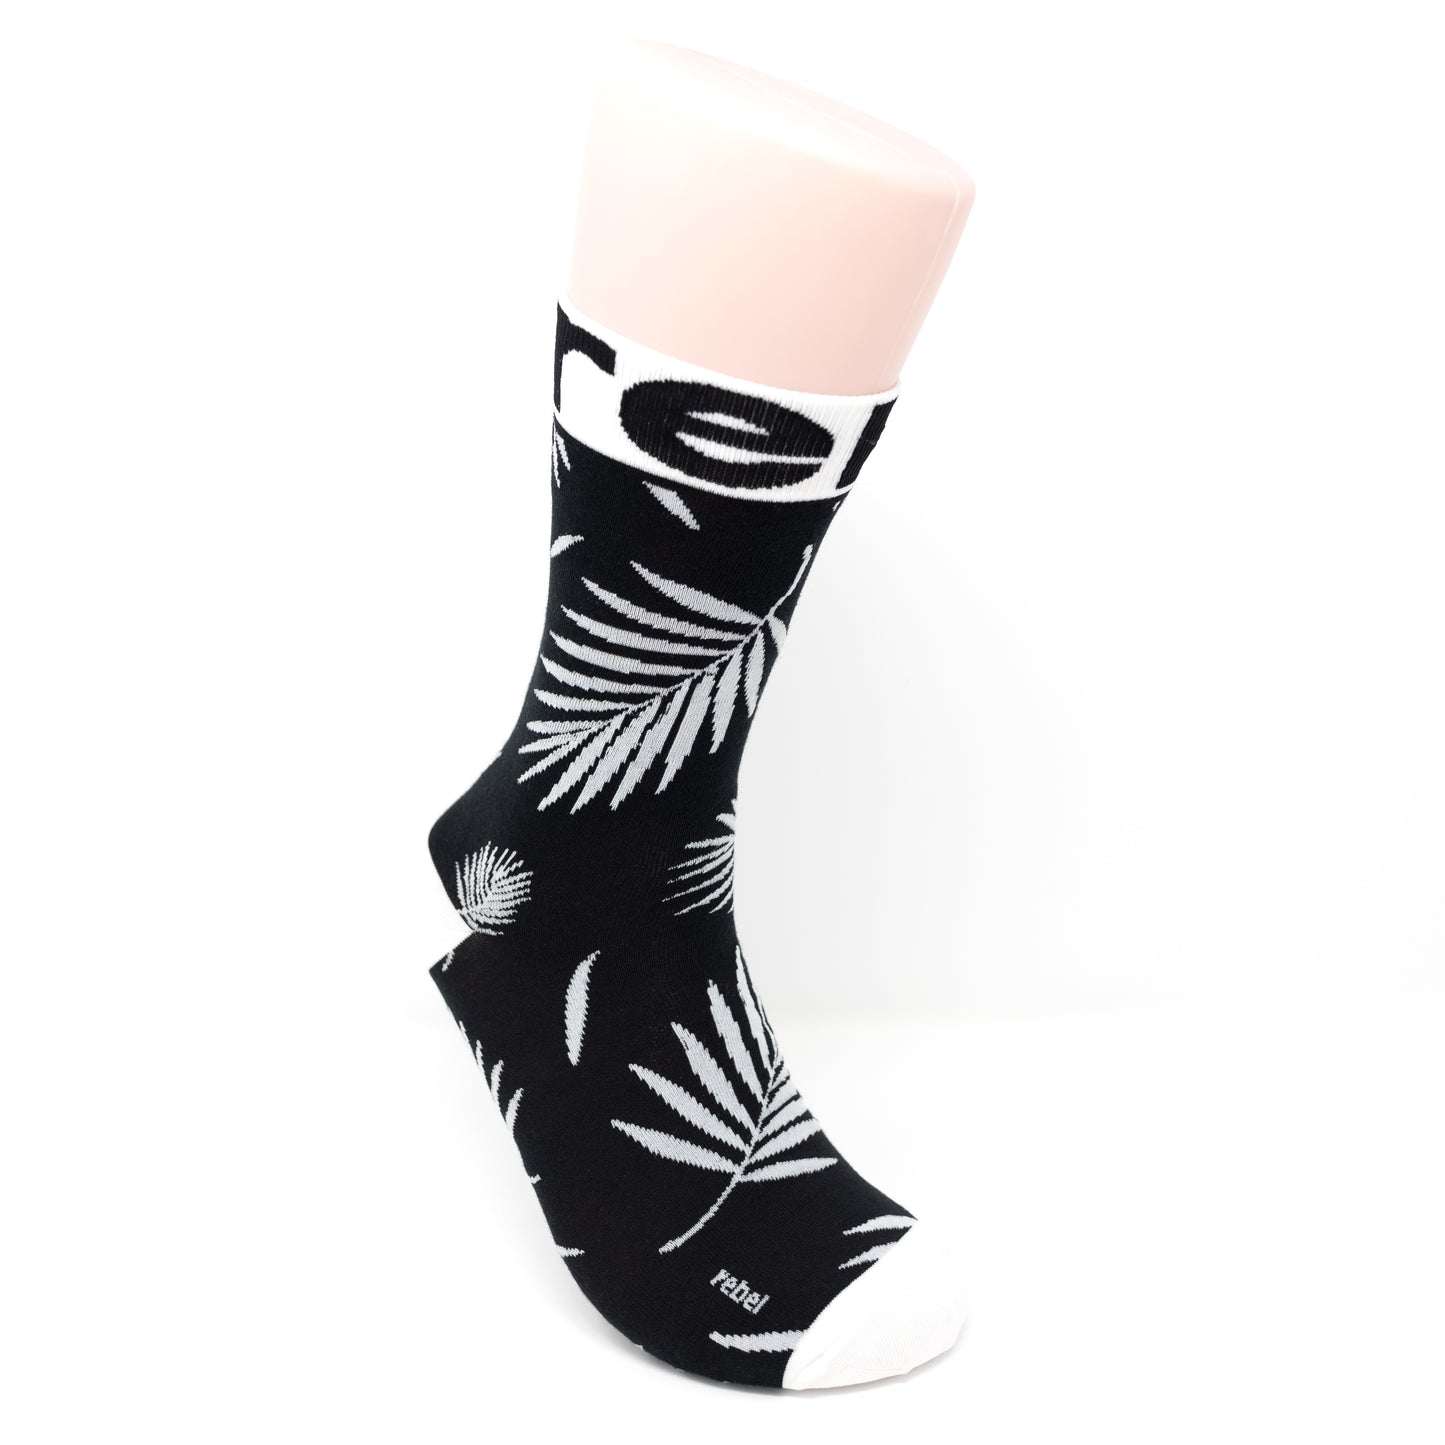 Featuring a unique and stylish design inspired by floral elements, these socks are perfect for anyone looking to add some flair to their wardrobe.